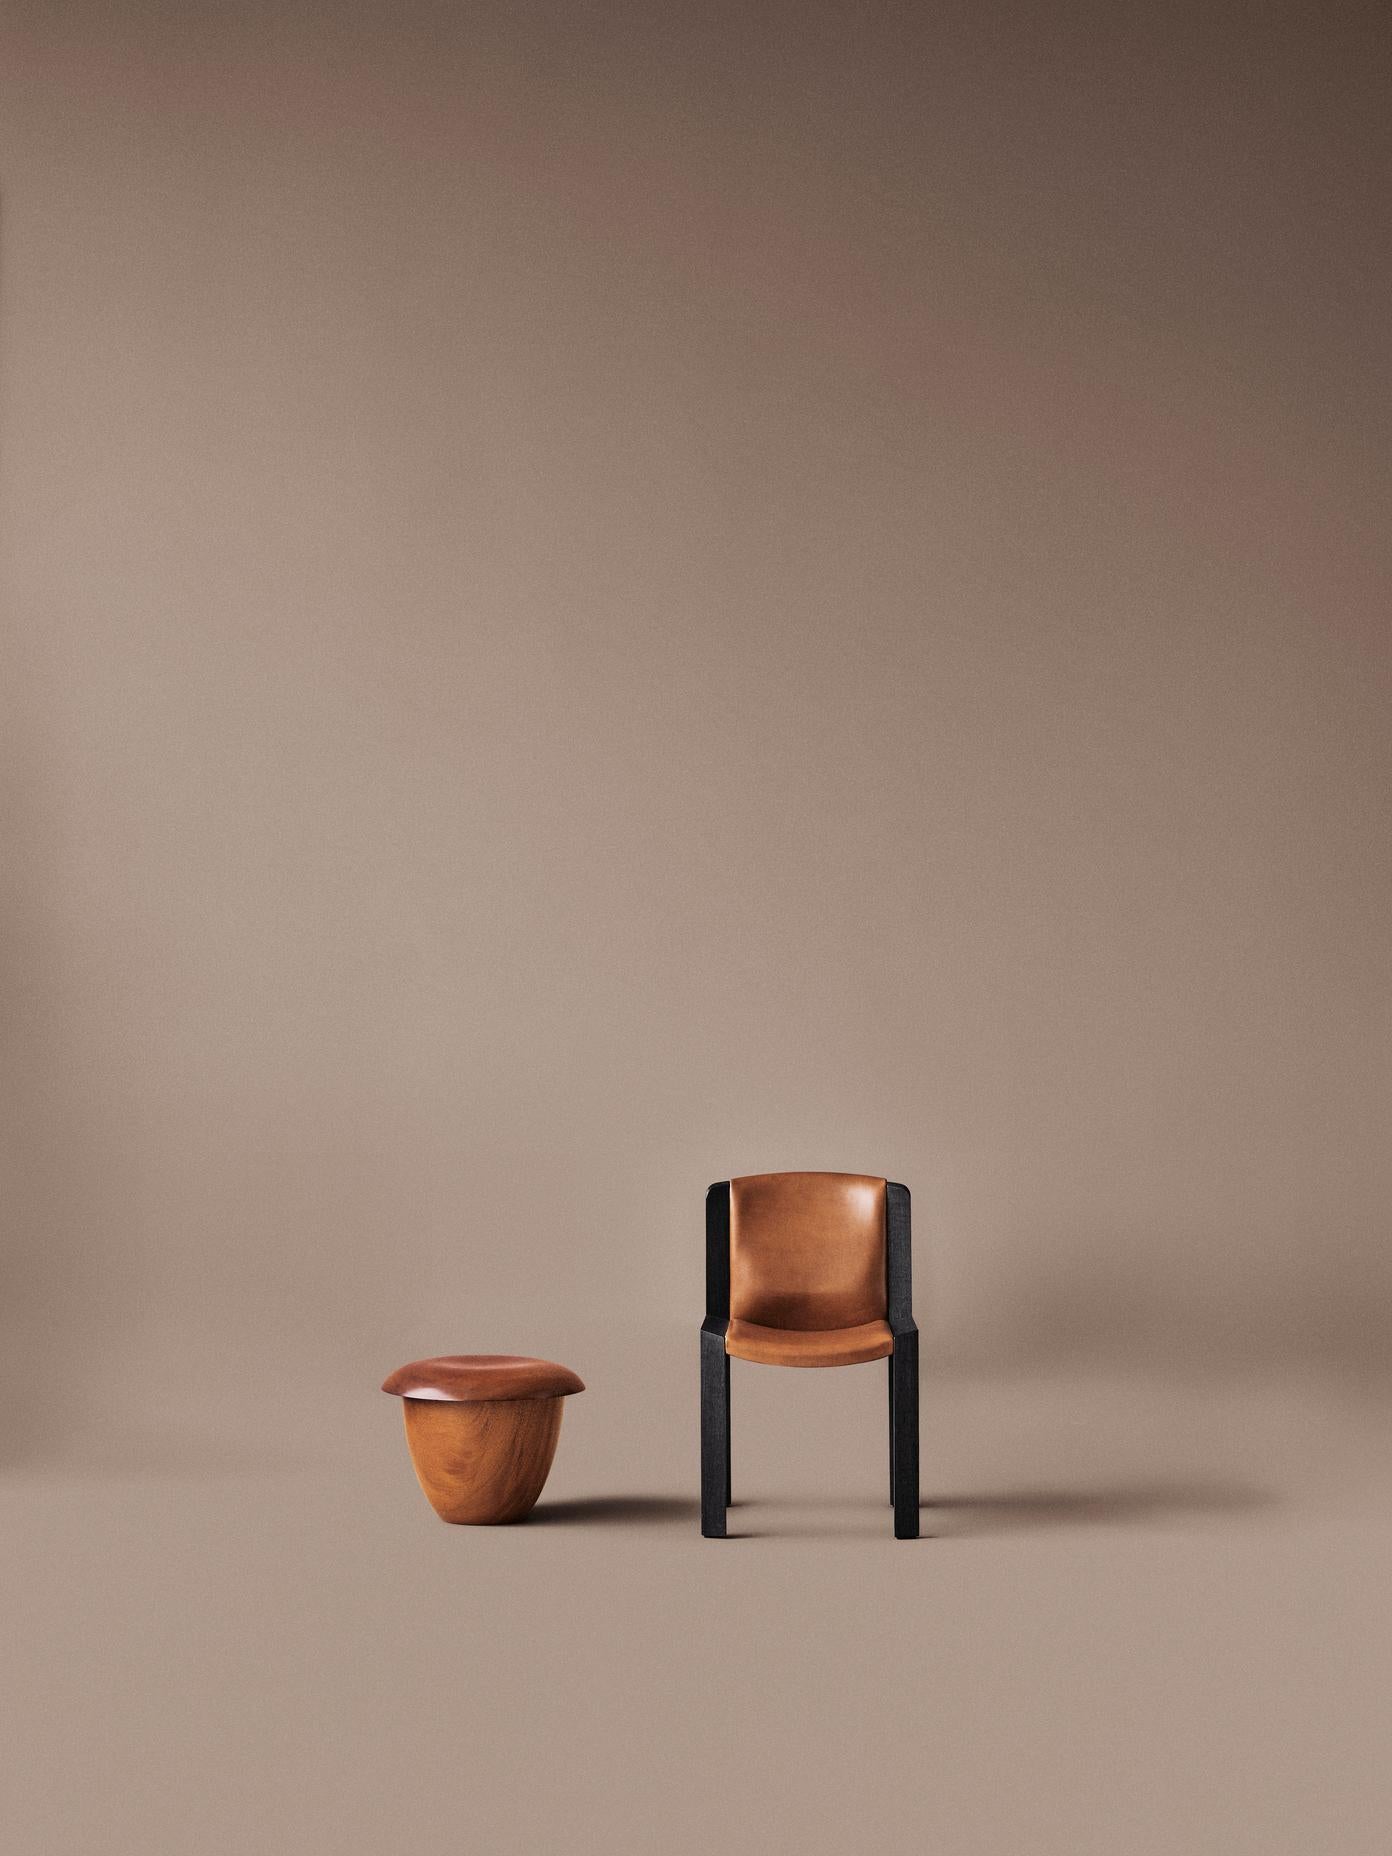 Joe Colombo 'Chair 300' Wood and Sørensen Leather Chair by Karakter In New Condition For Sale In Barcelona, Barcelona